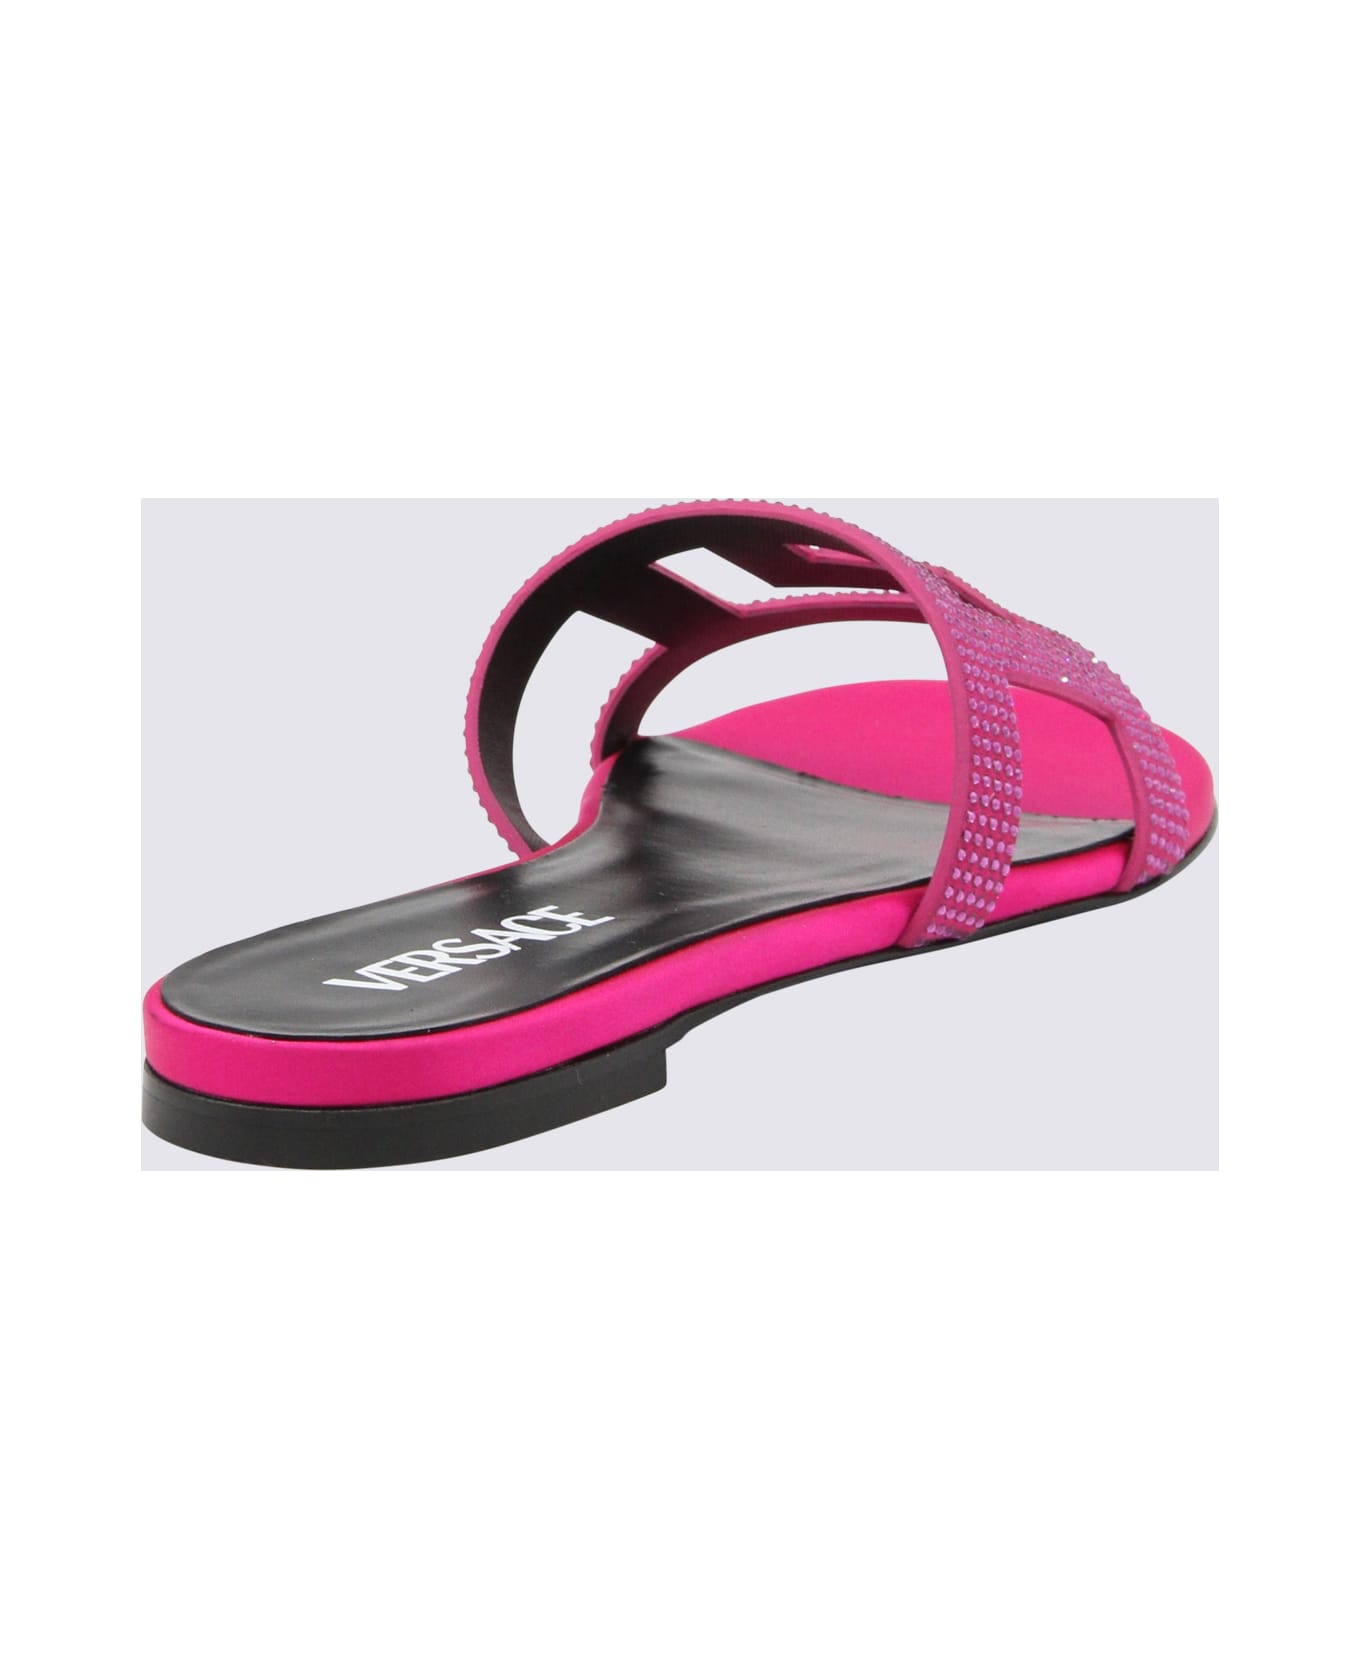 Versace Pink Leather Greca Maze Sandals - GLOSSY PINK-ORO VERSACE